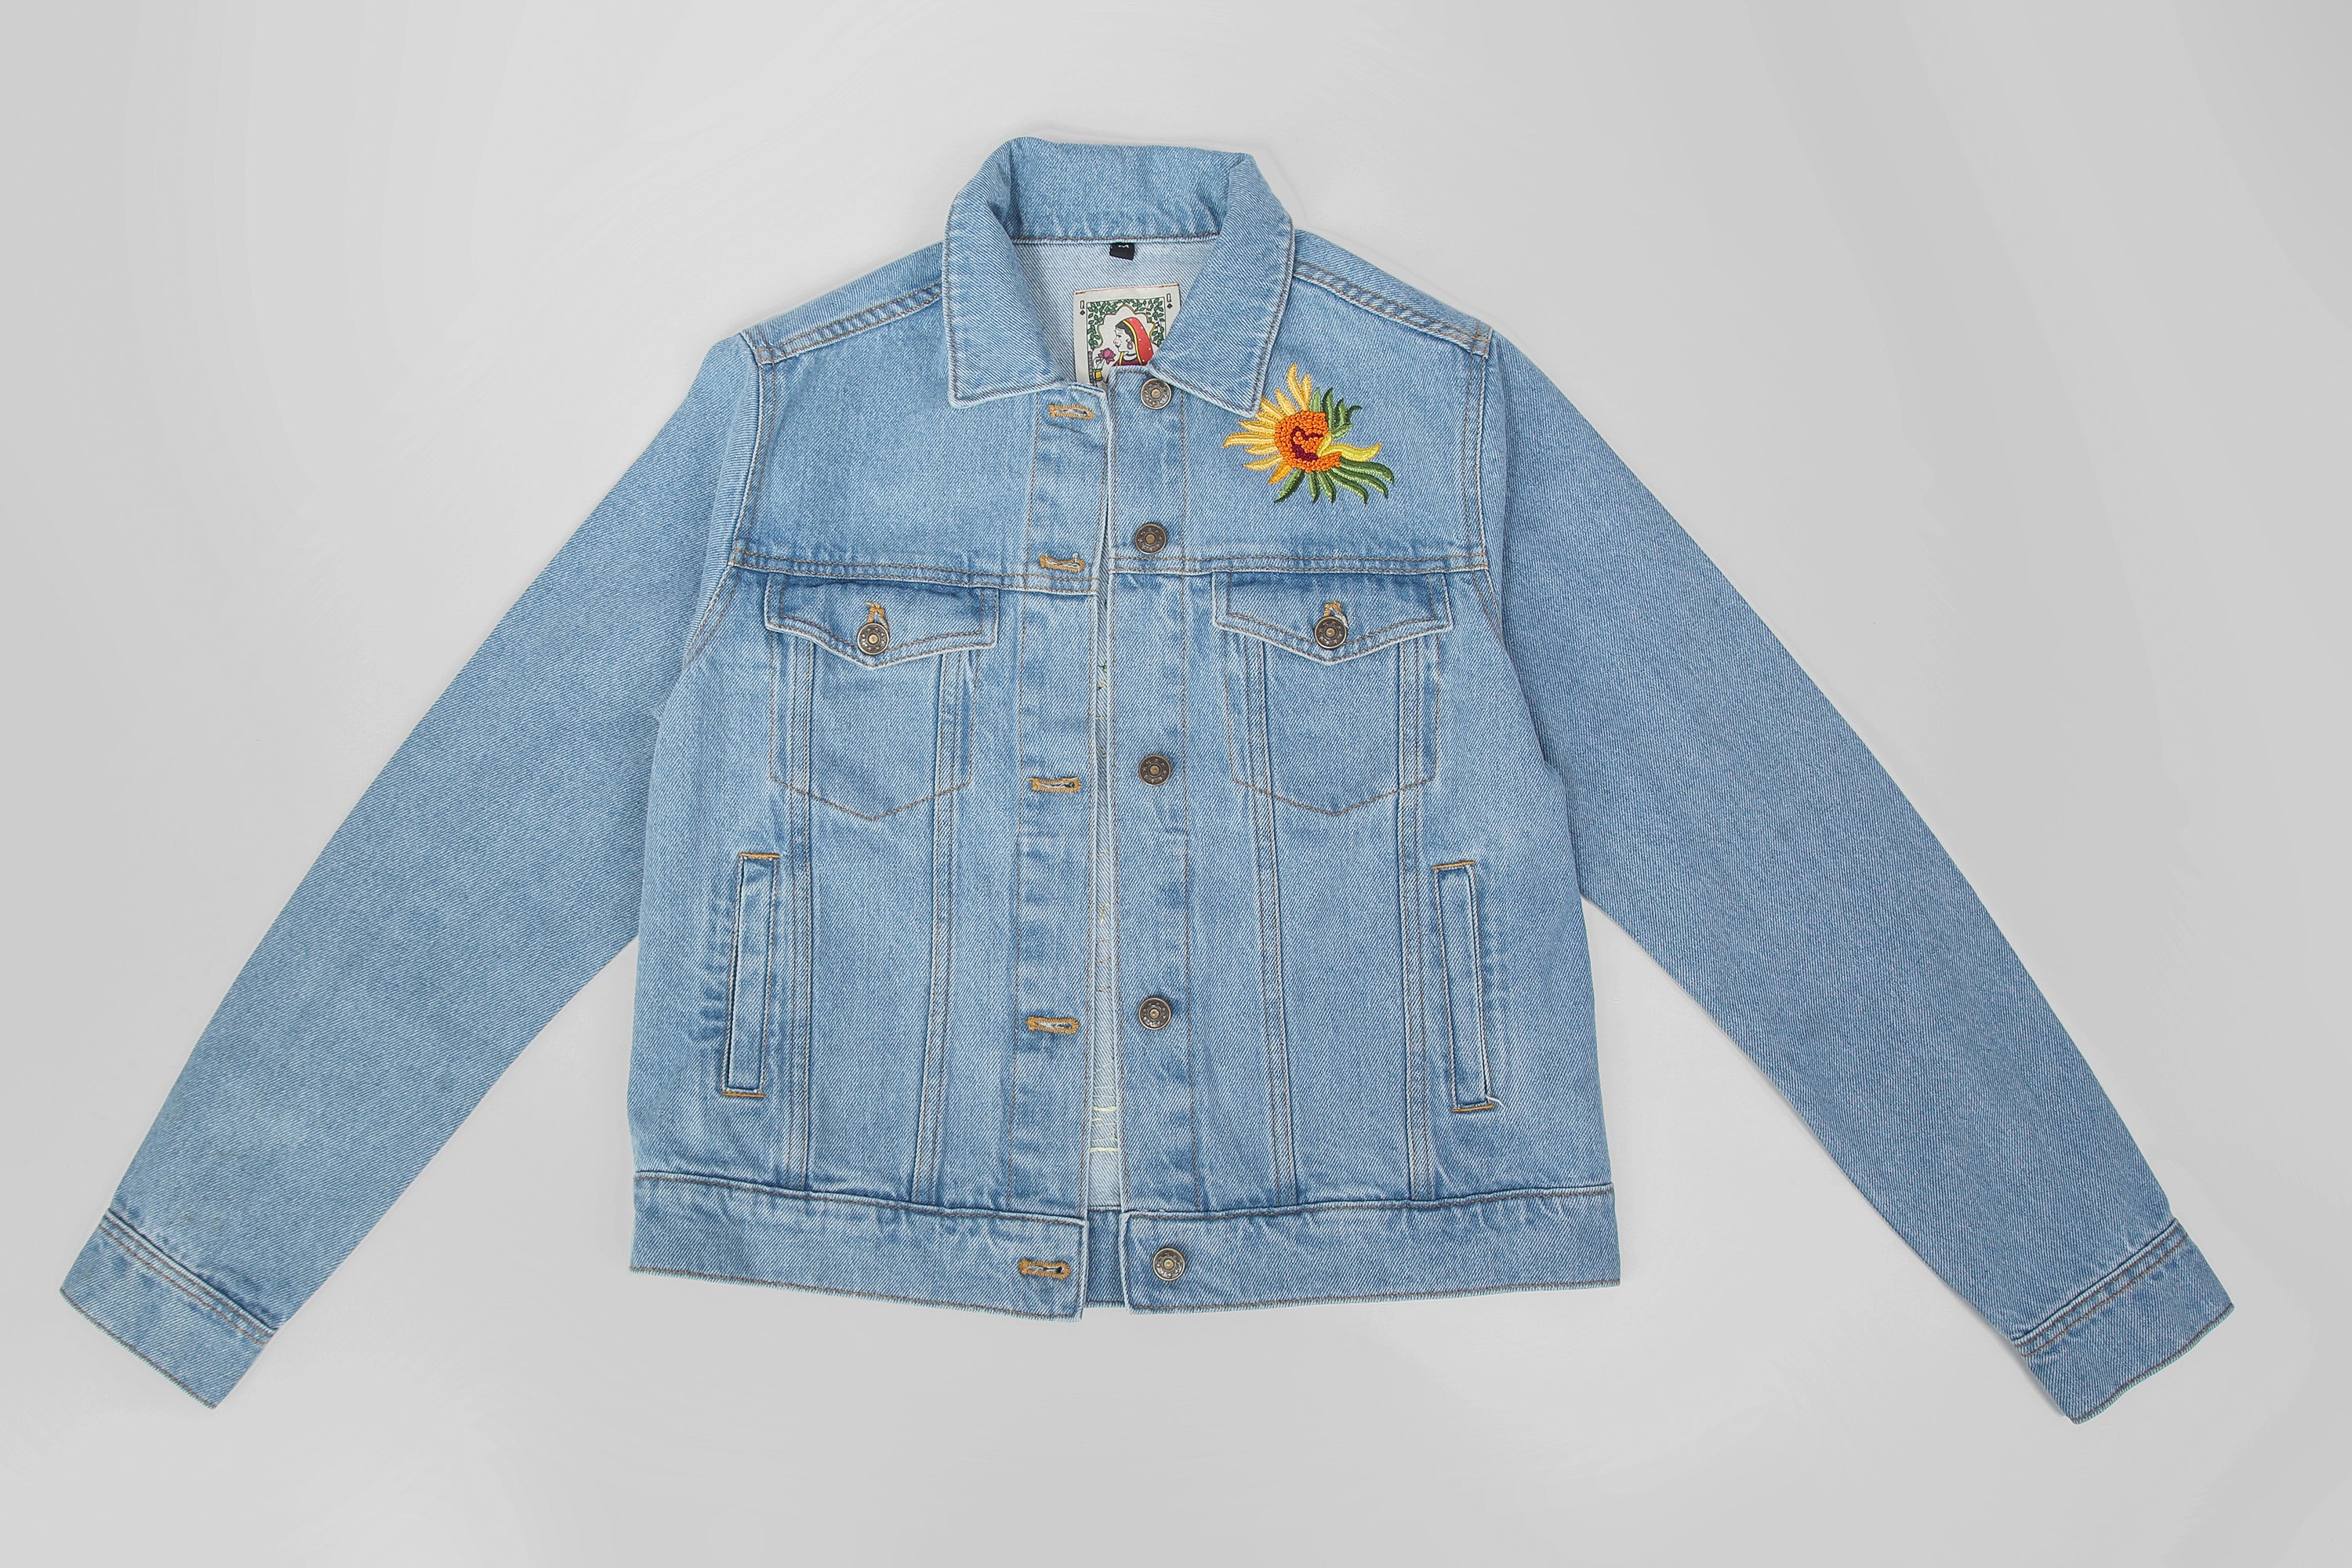 Gucci Denim Jacket With Embroideries $1,850 - Buy AW17 Online - Fast  Delivery, Price | Gucci denim, Denim jacket, Leather jacket style